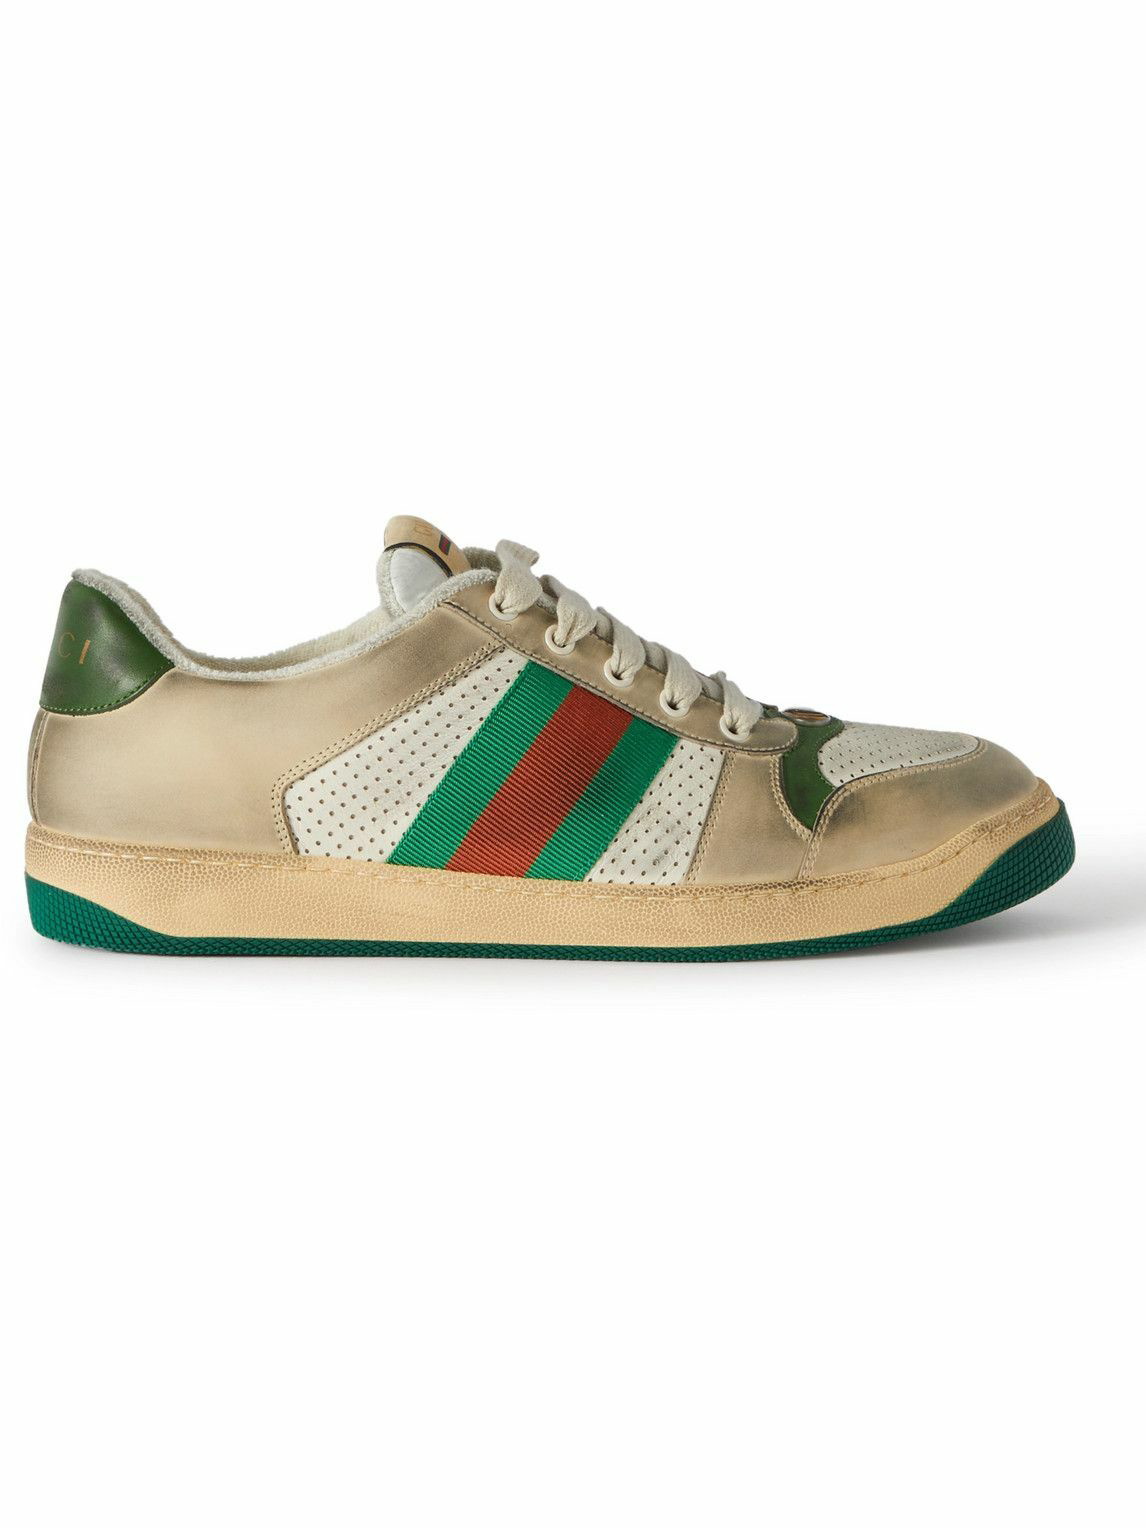 GUCCI - Virtus Distressed Leather and Webbing Sneakers - White Gucci